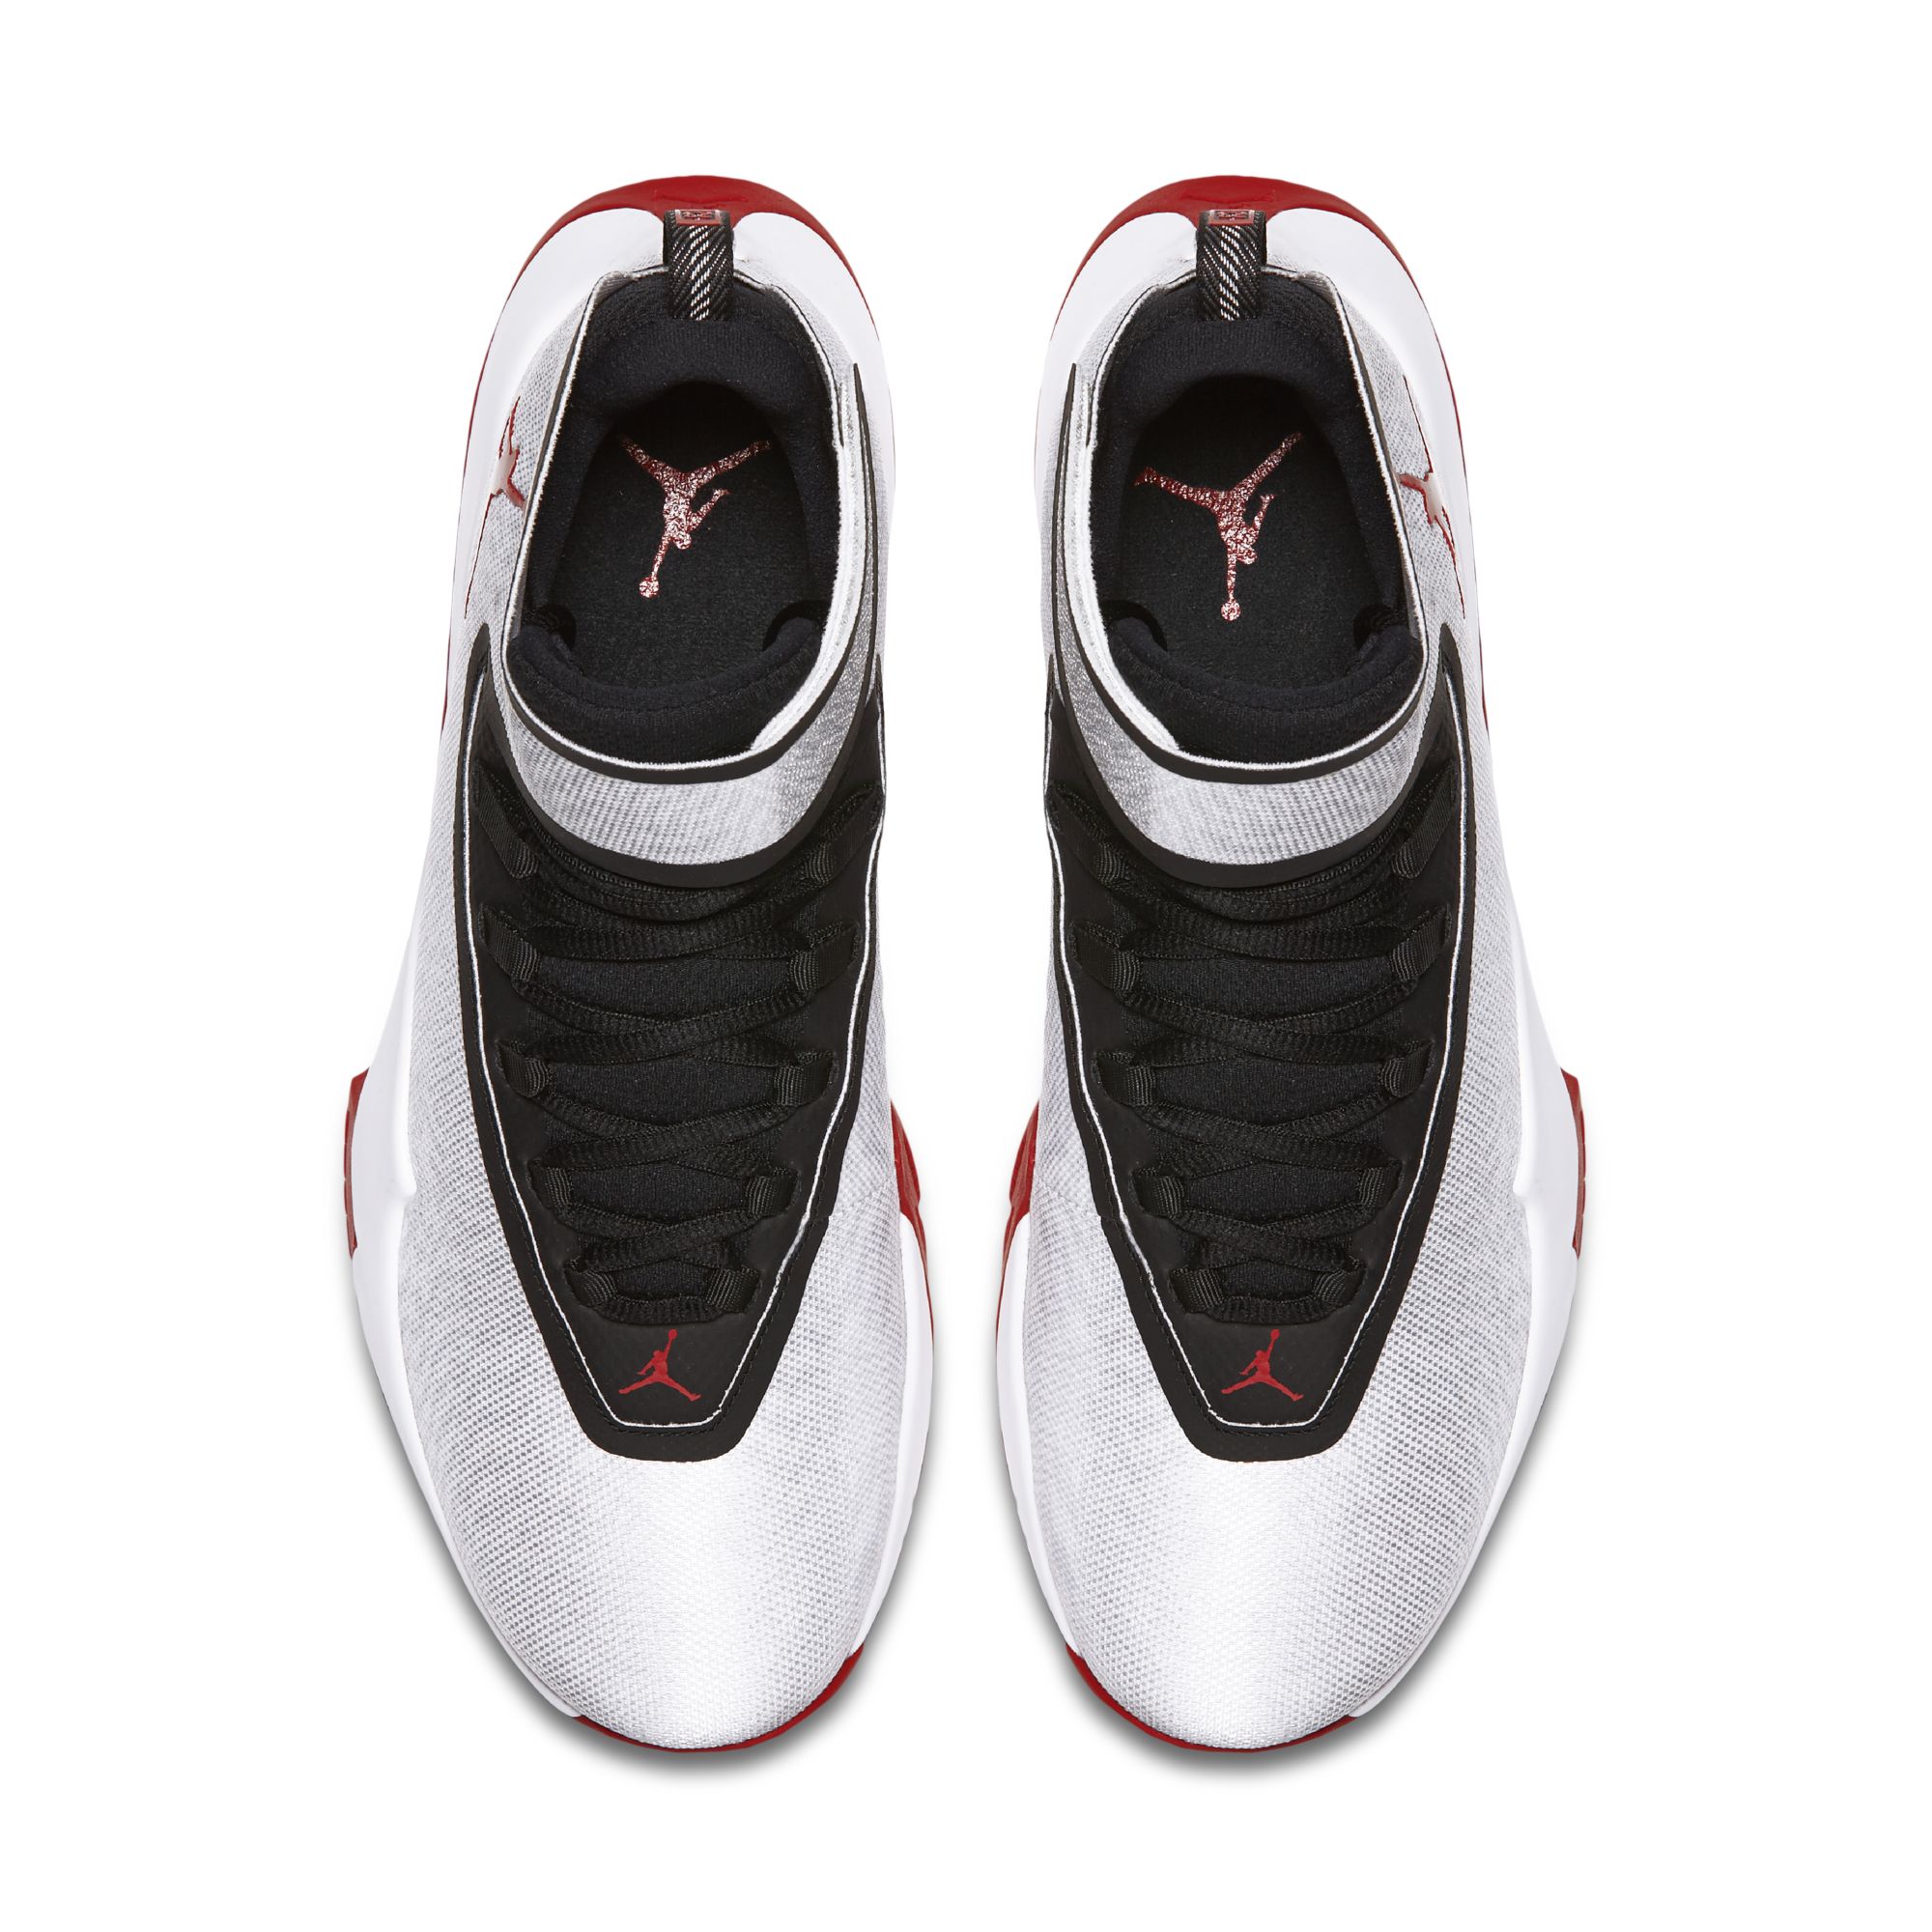 jordan fly unlimited red and black